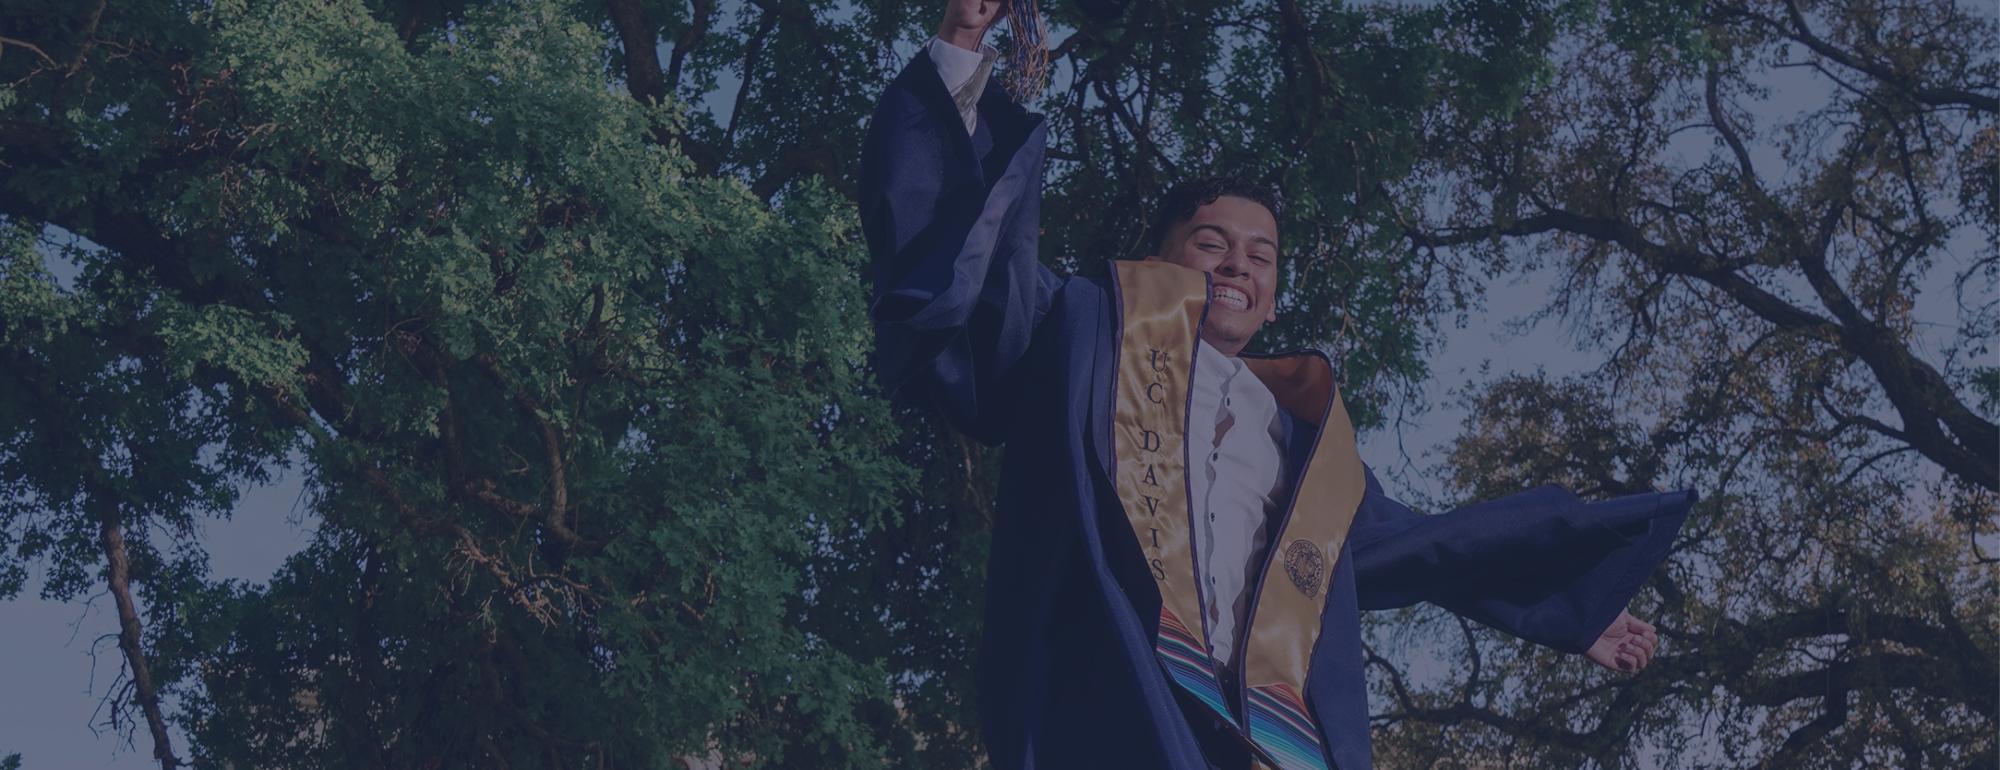 Male student in graduation robes jumping into the air in celebration